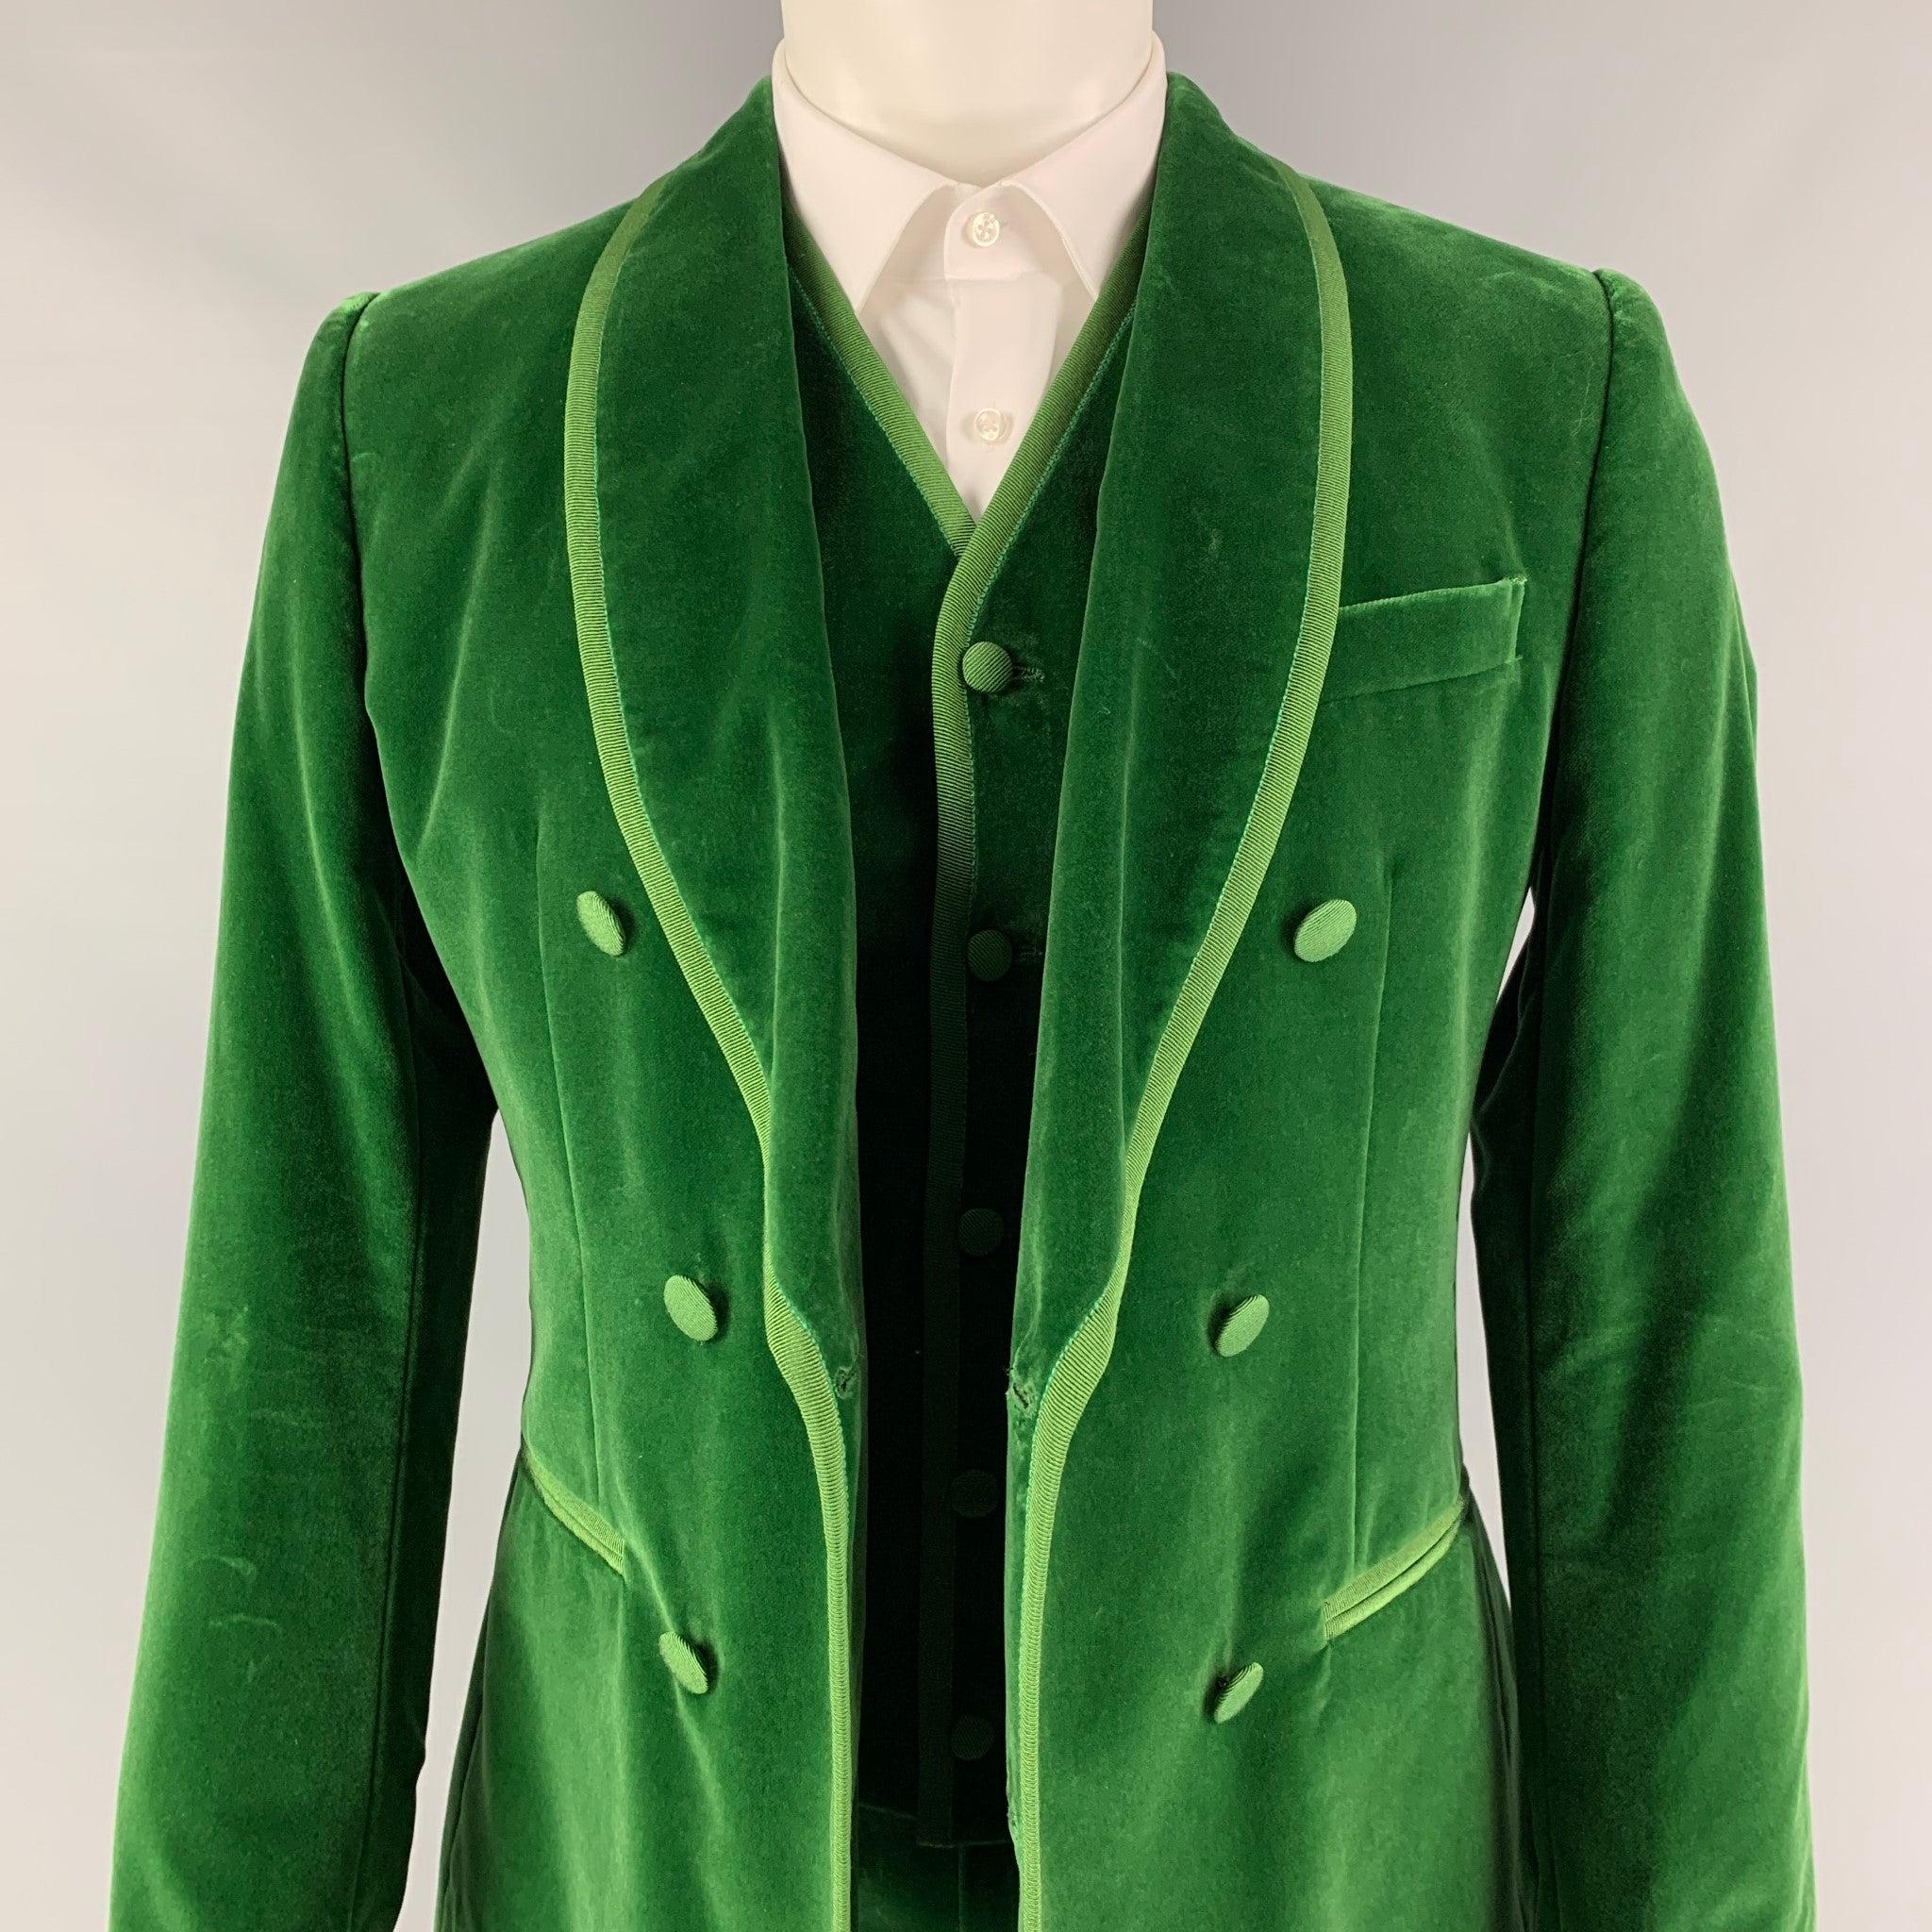 DOLCE & GABBANA 3 Piece
suit comes in a green velvet with a full liner and includes a single breasted button sport coat with a shawl collar and matching flat front trousers. Waist and length of pants need to be altered to size. Made in Italy. New